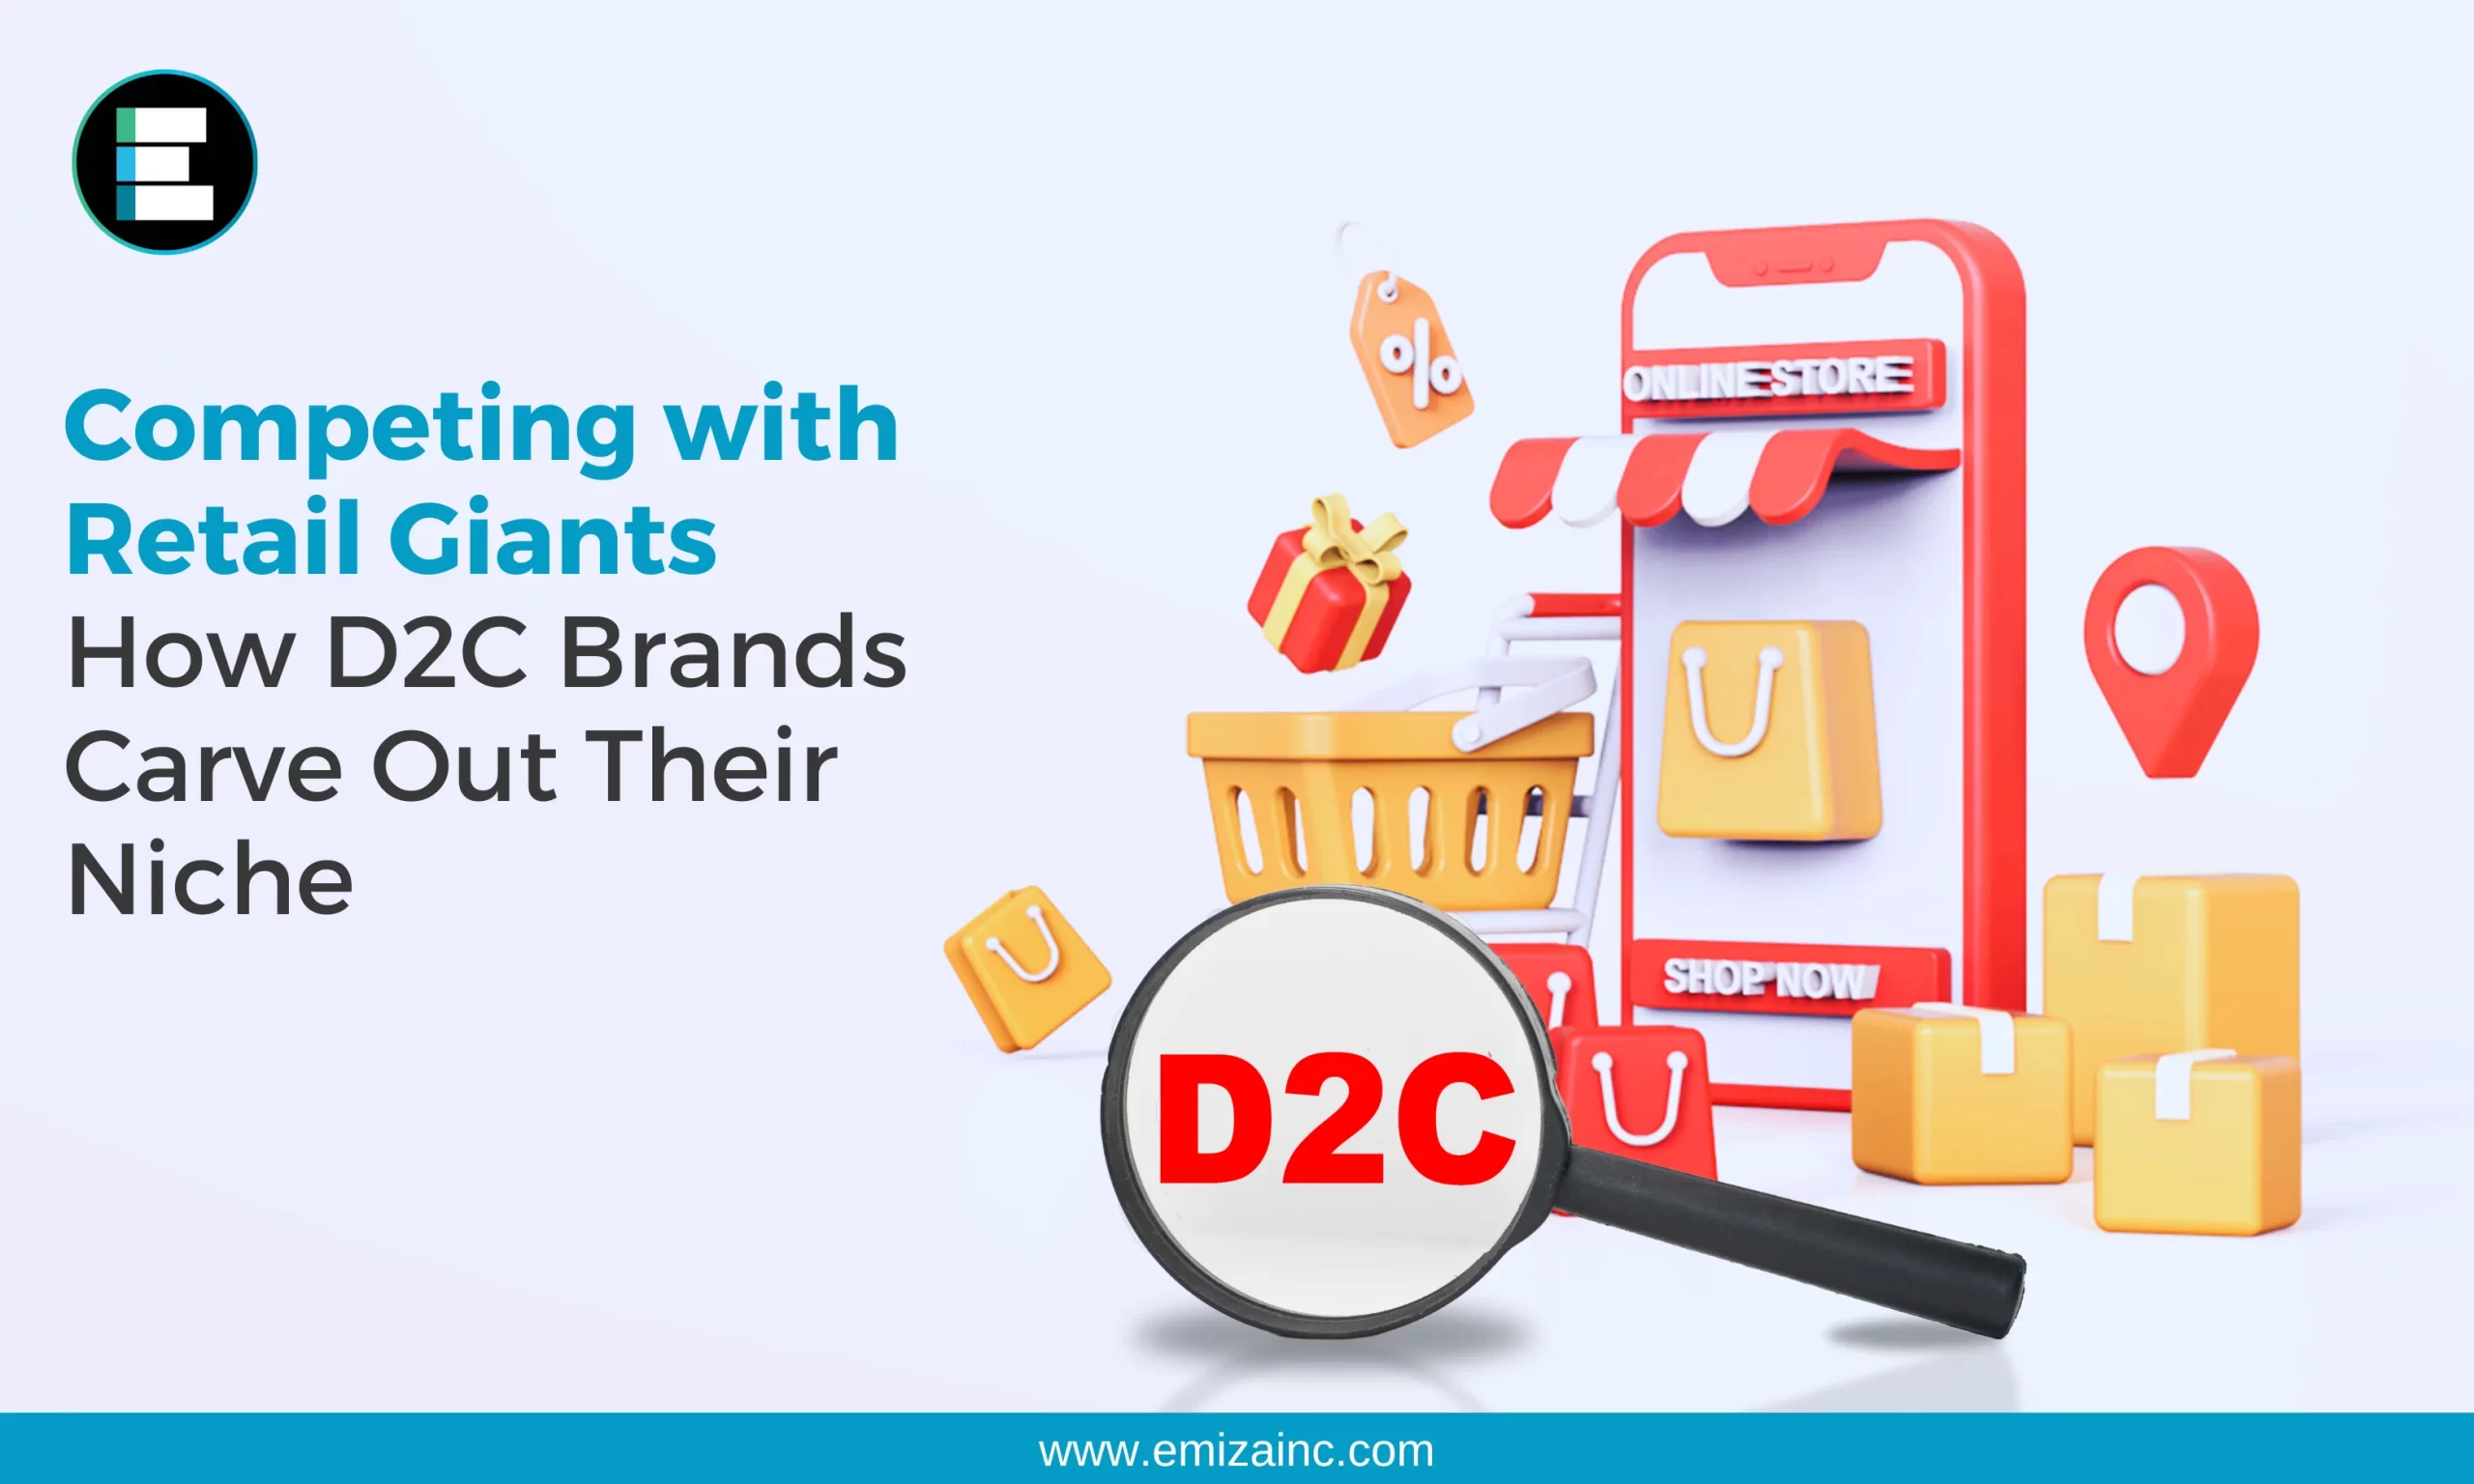 Competing with Retail Giants How D2C Brands Carve Out Their Niche